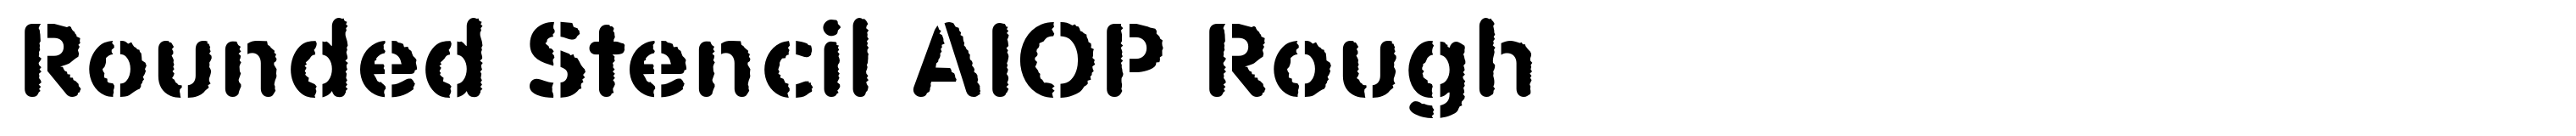 Rounded Stencil AIOP Rough